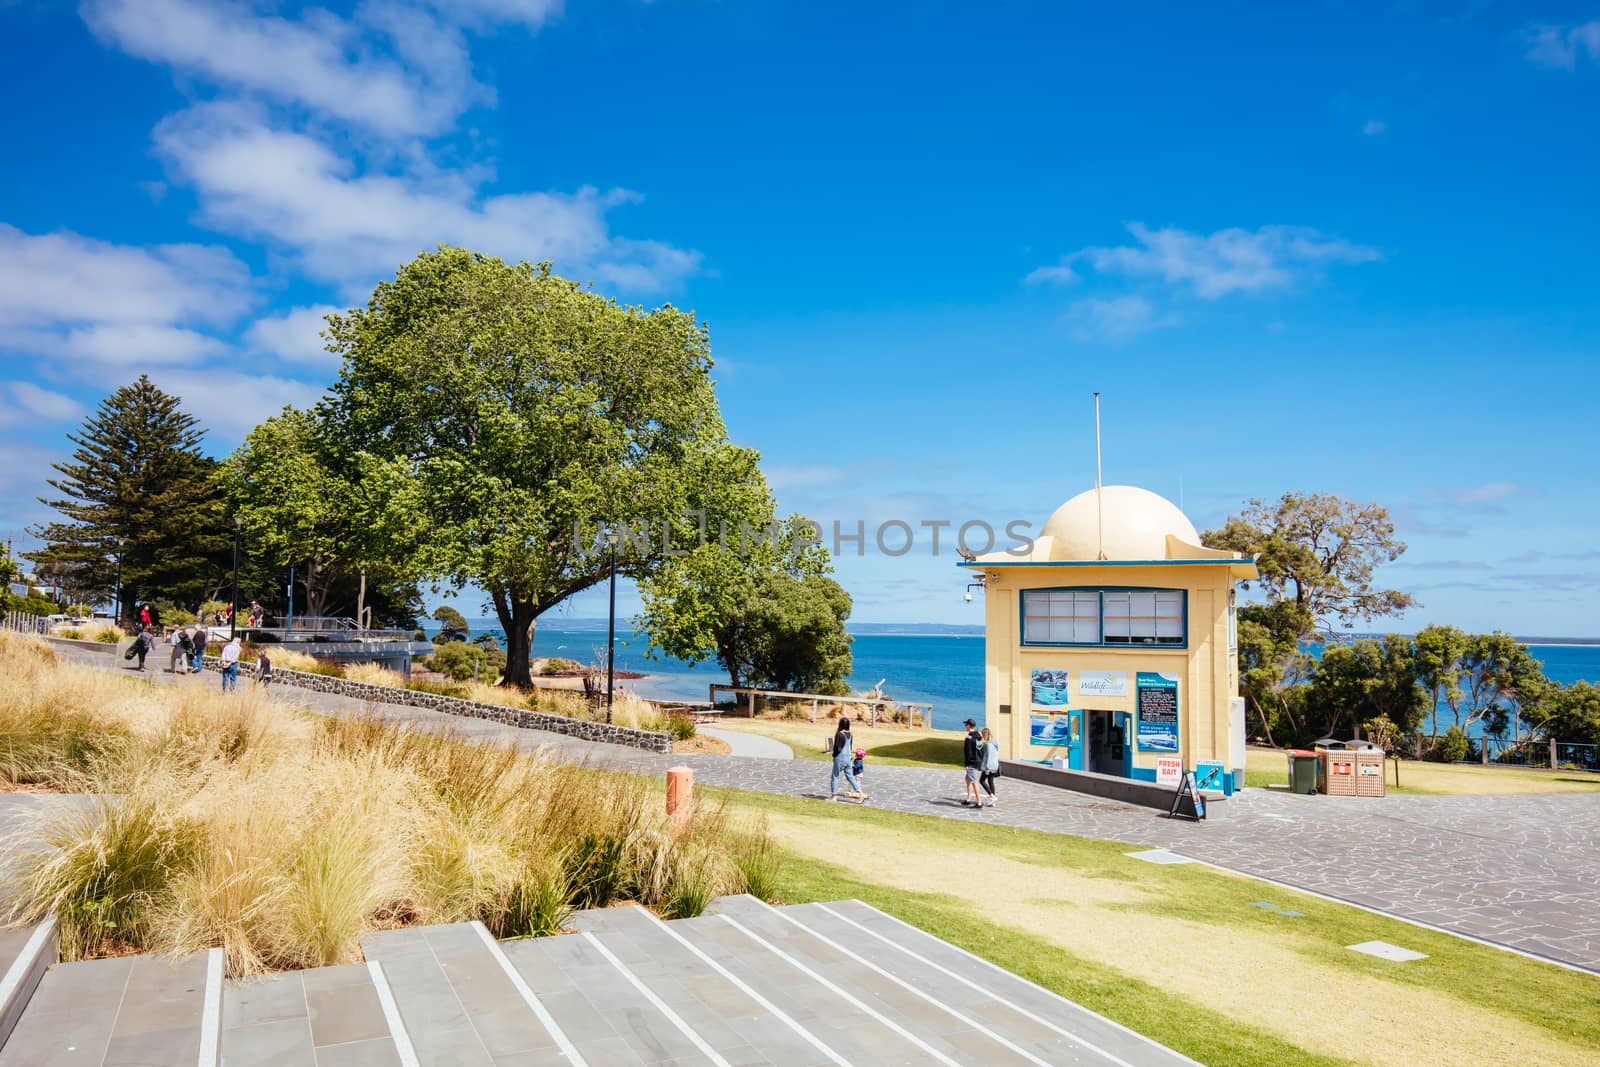 Cowes, Australia - December 8 2019: Cowes Foreshore and its iconic jetty and beach on a warm summer's day in Philip Island, Australia